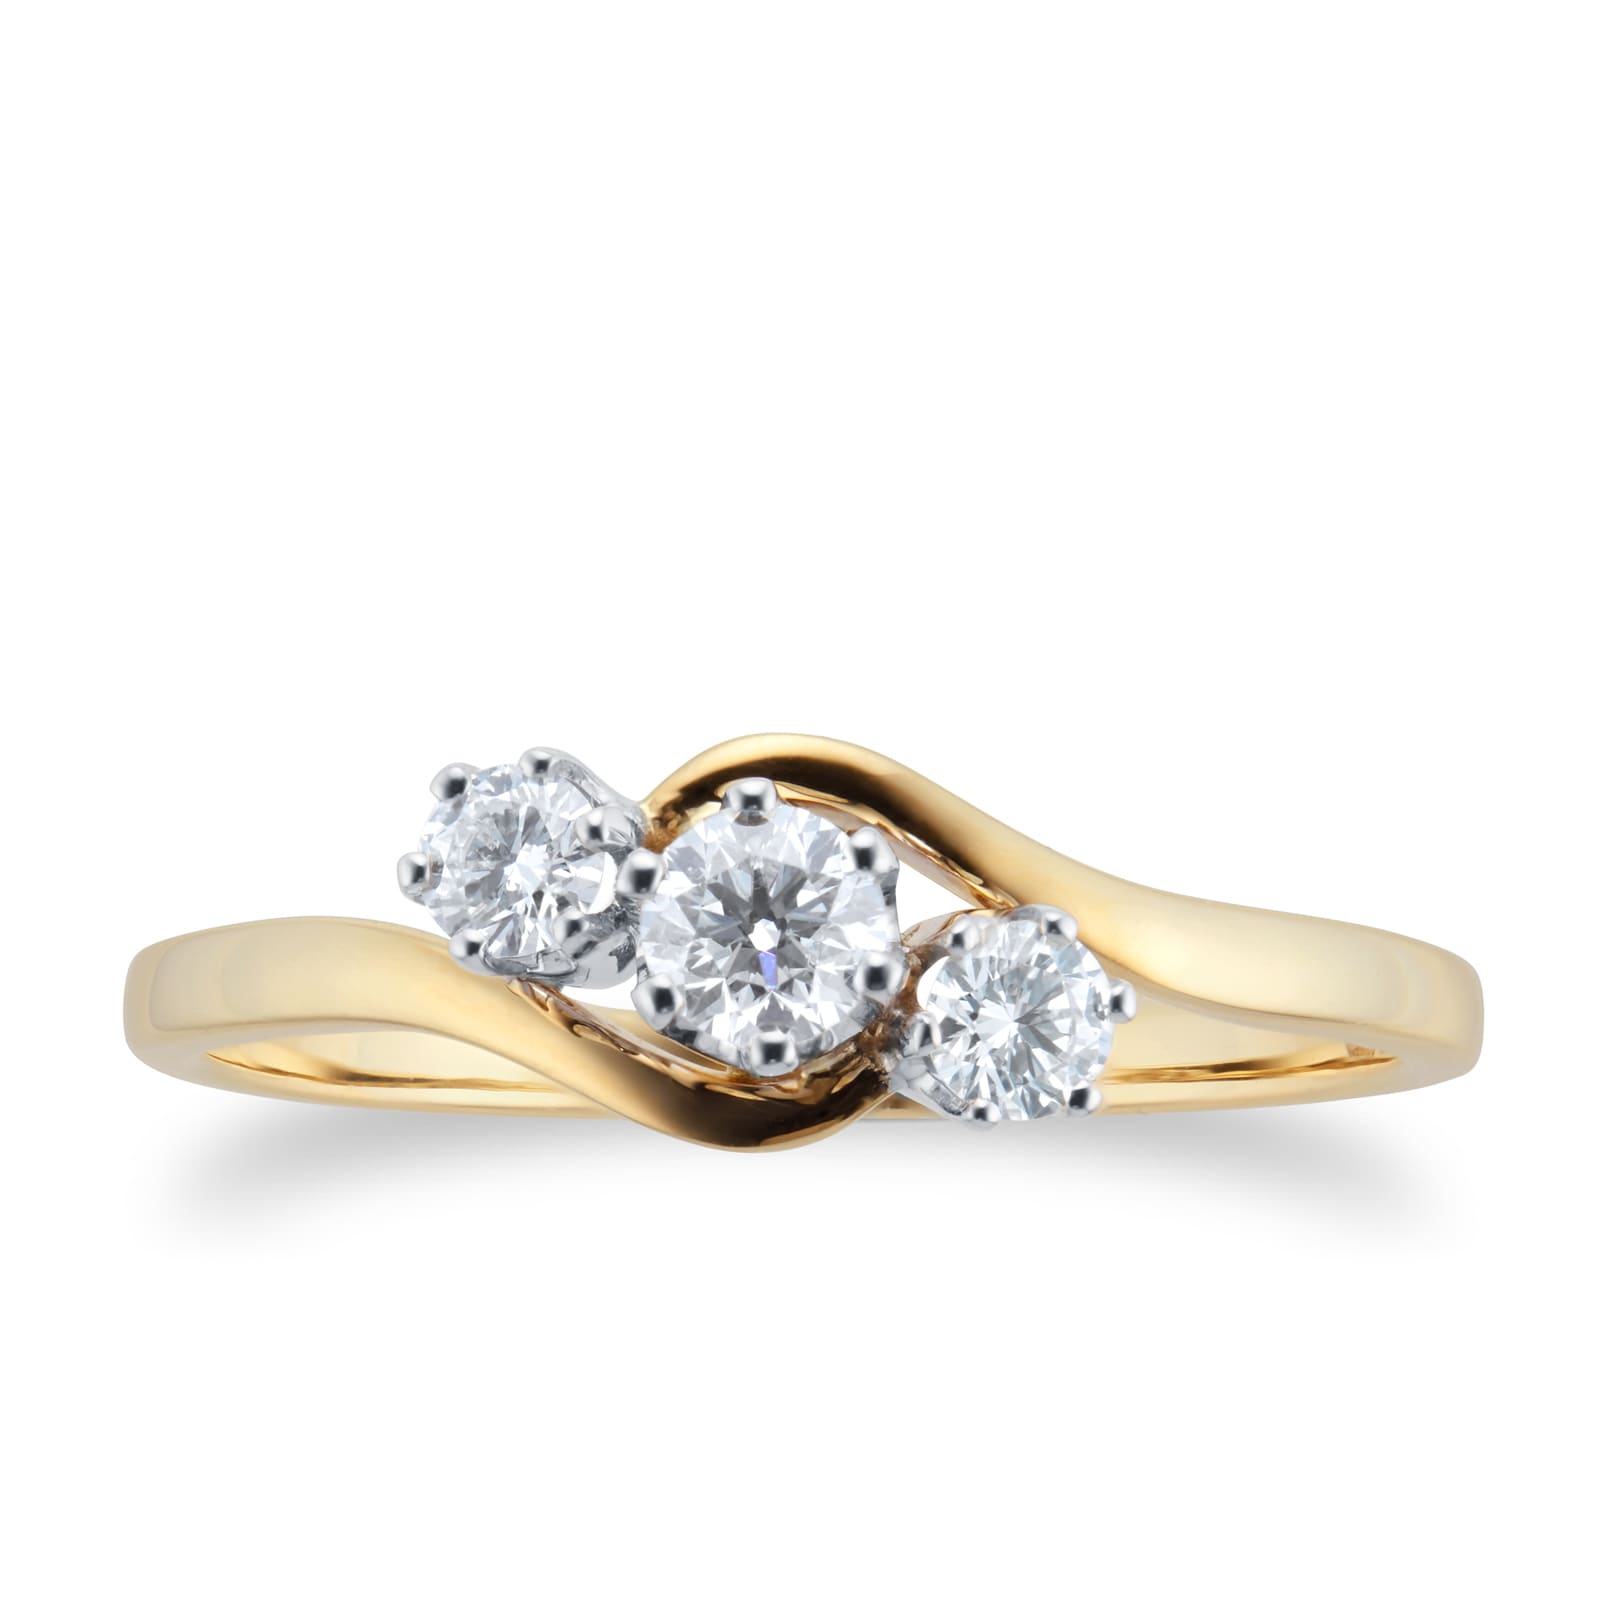 18ct Yellow Gold 0.50cttw Brilliant Cut 3 Stone Diamond Ring - Ring Size T.5